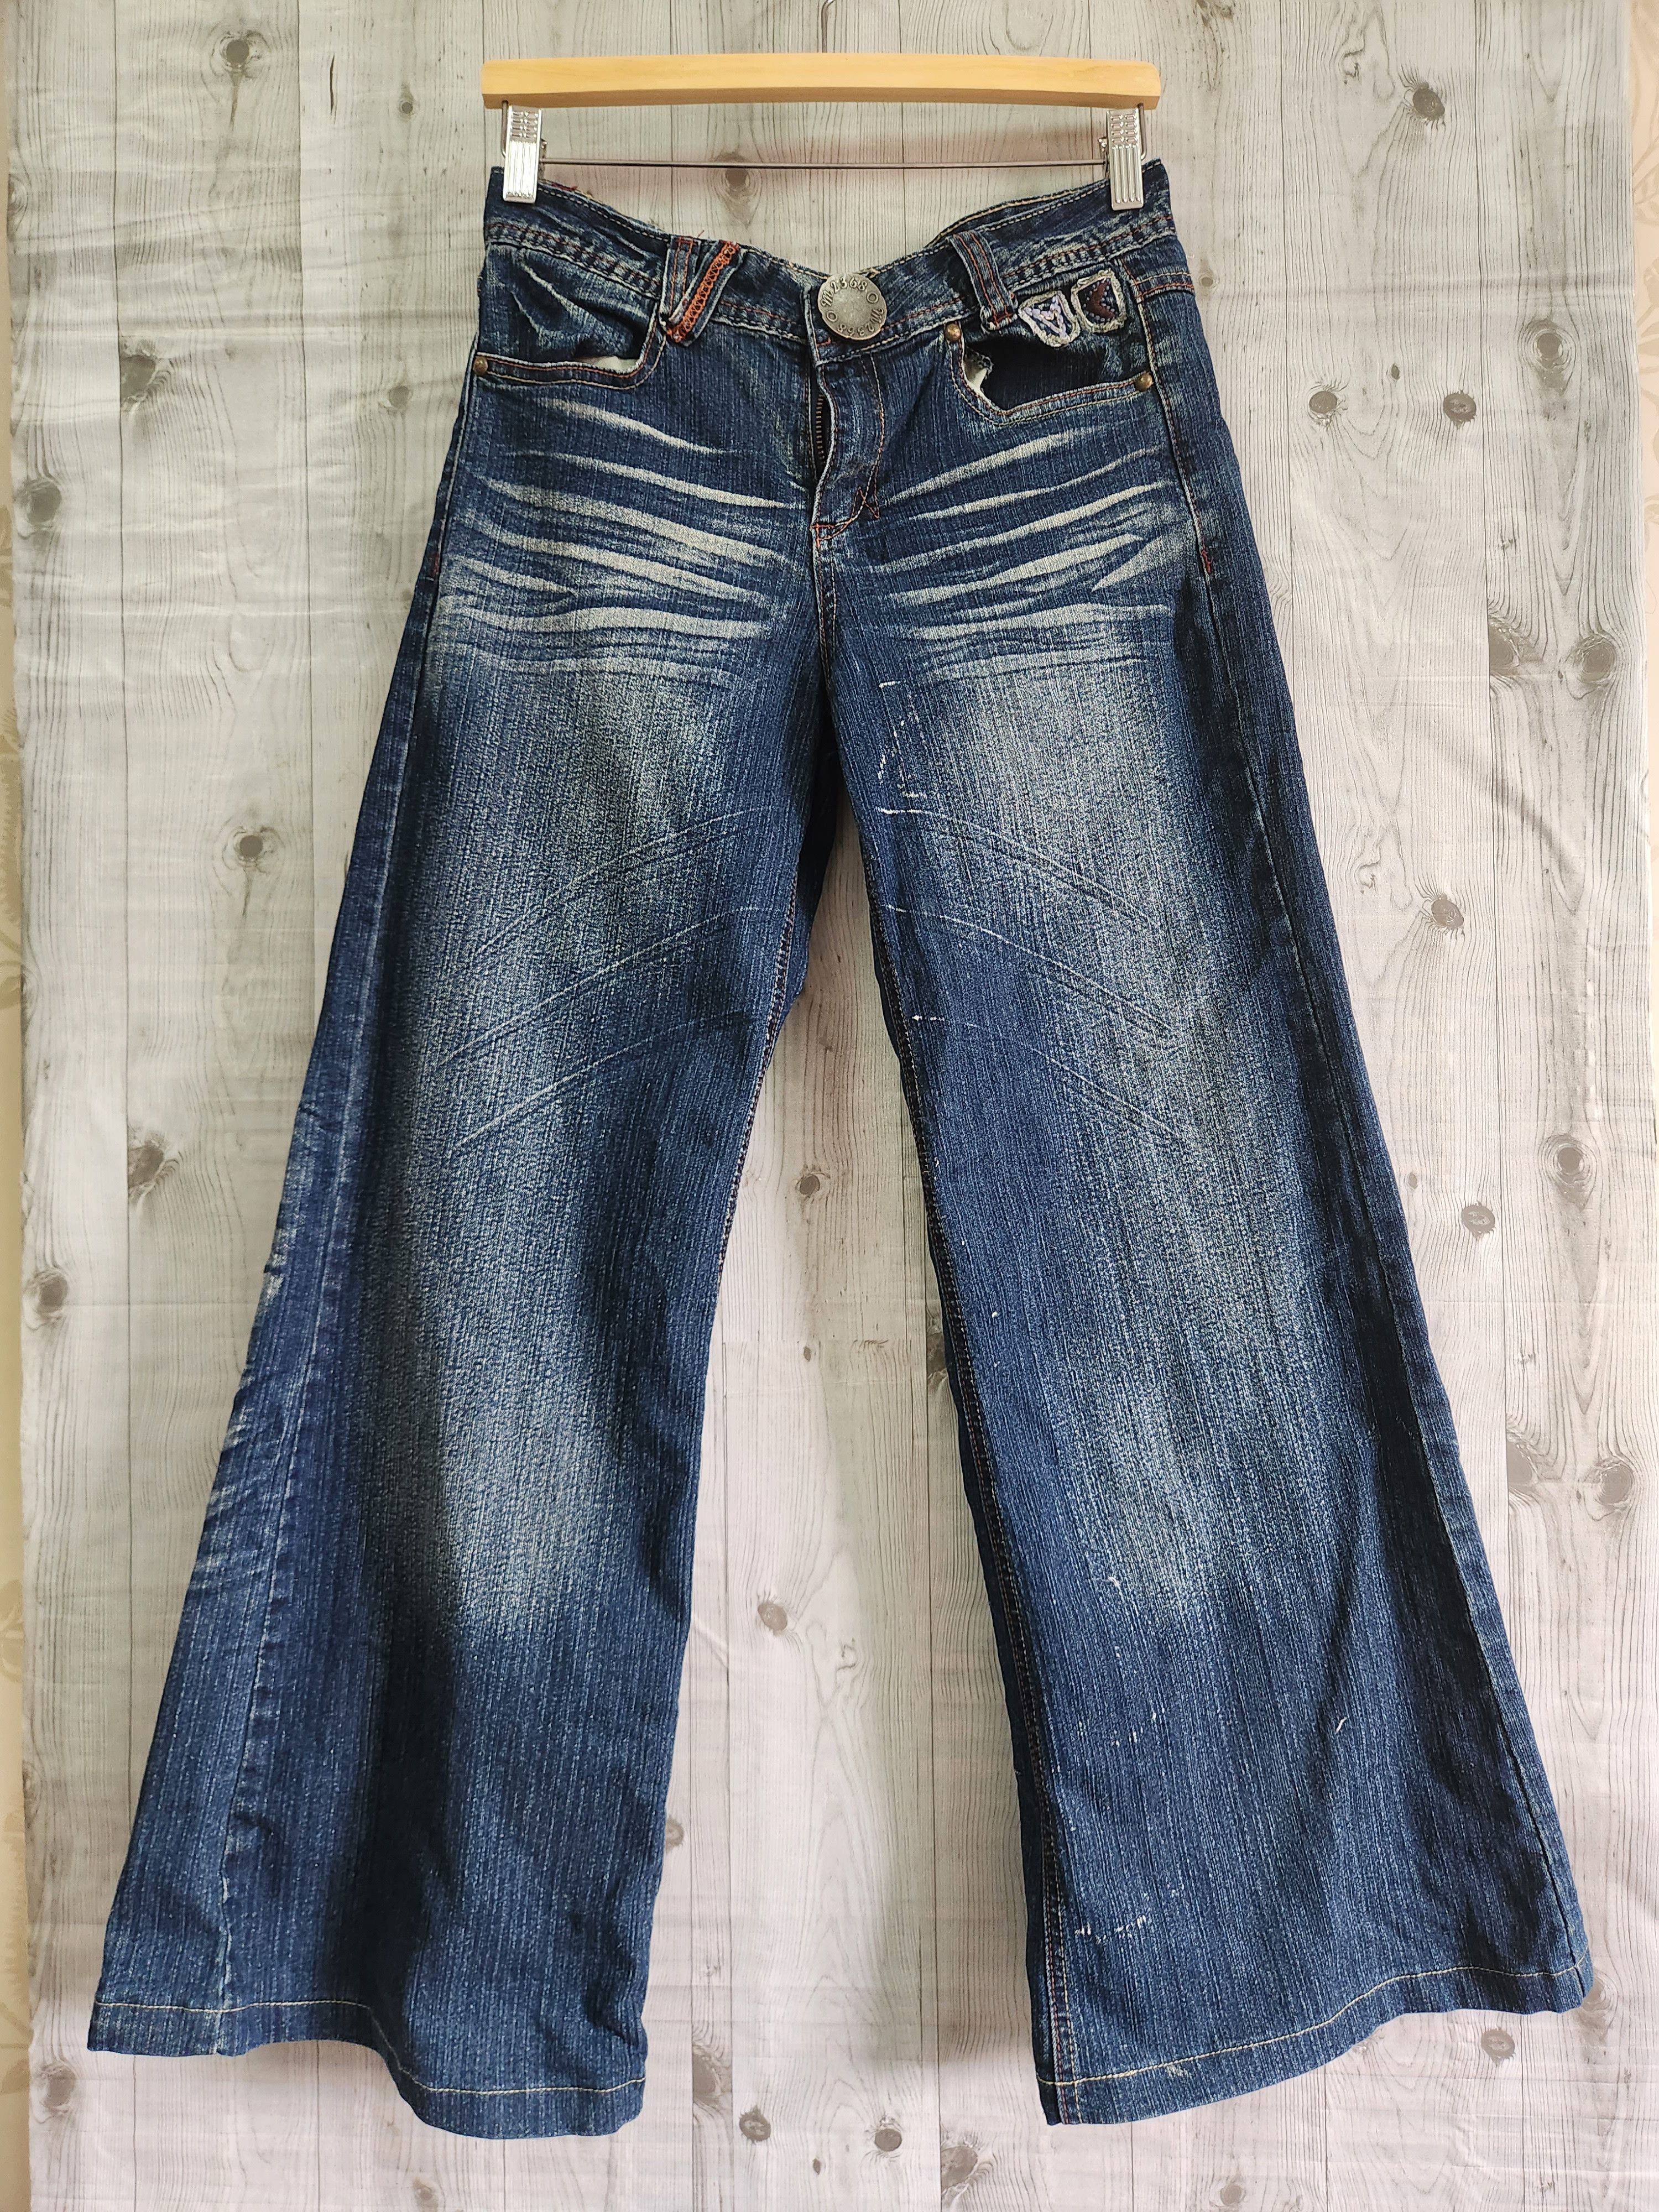 If Six Was Nine - Maxia M2368 Flare Denim Japanese Jeans - 1